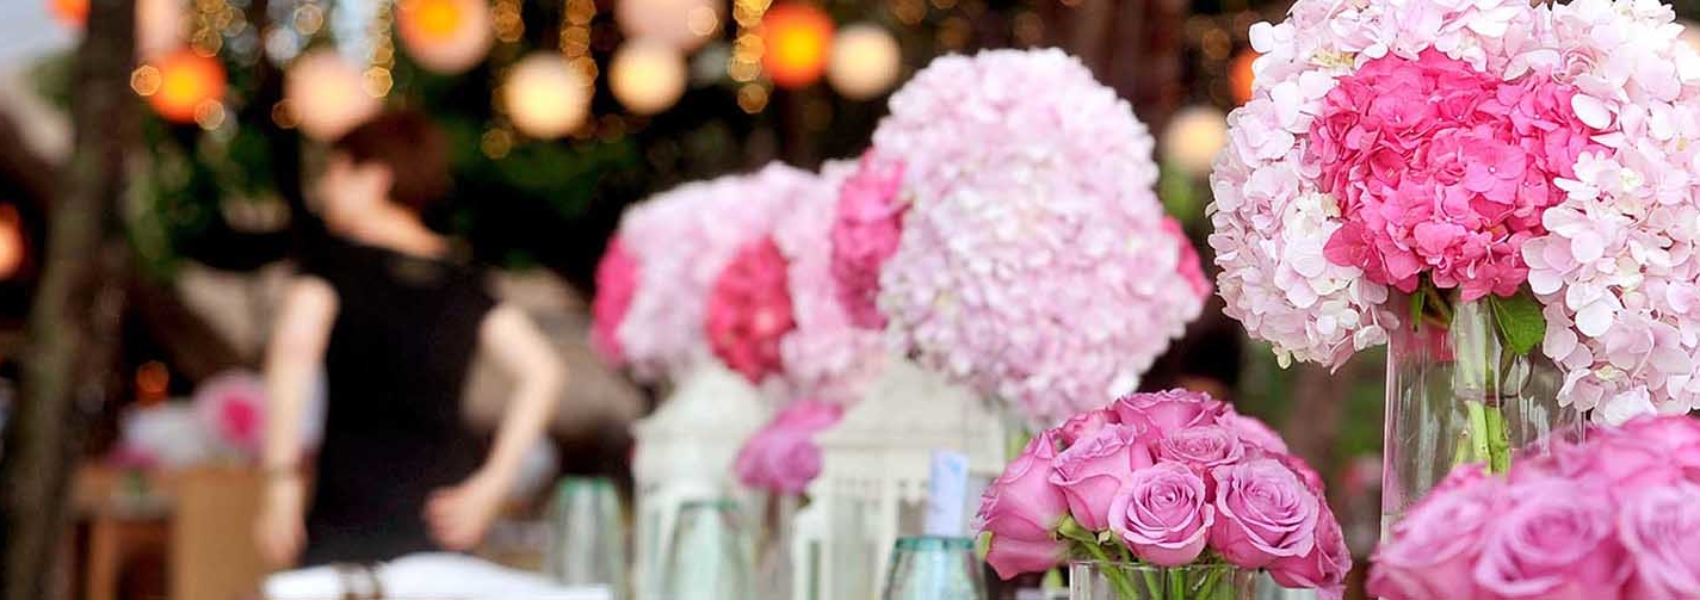 wedding-centerpiece-of-pink-roses-and-pink-hydrangeas